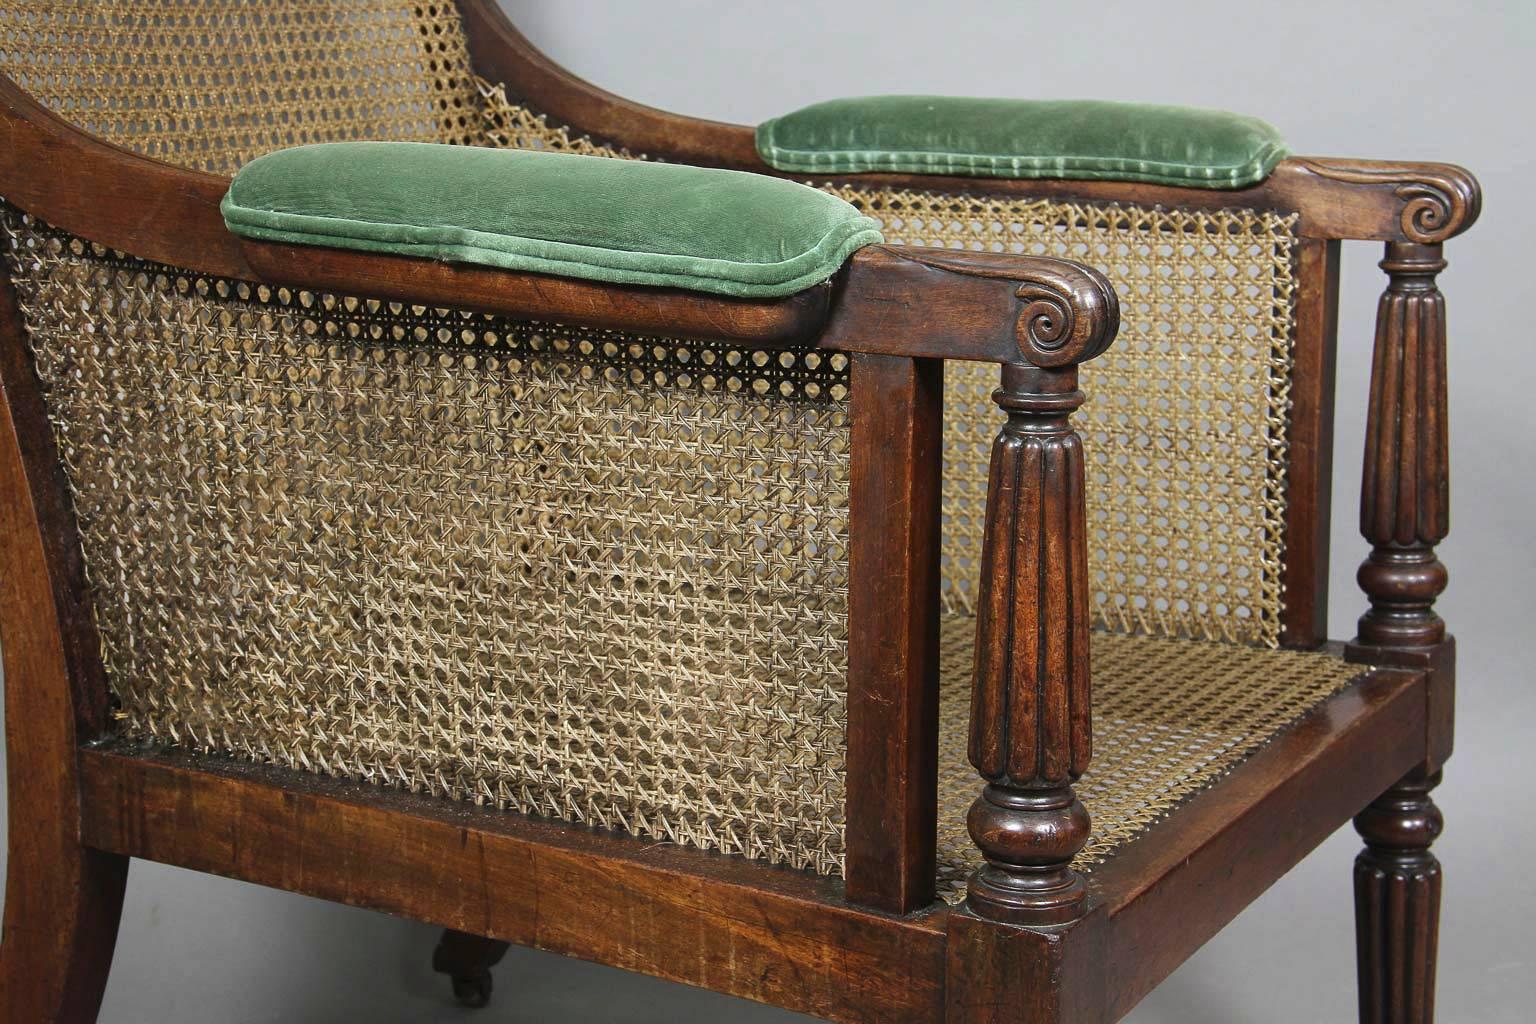 caned bergere chairs